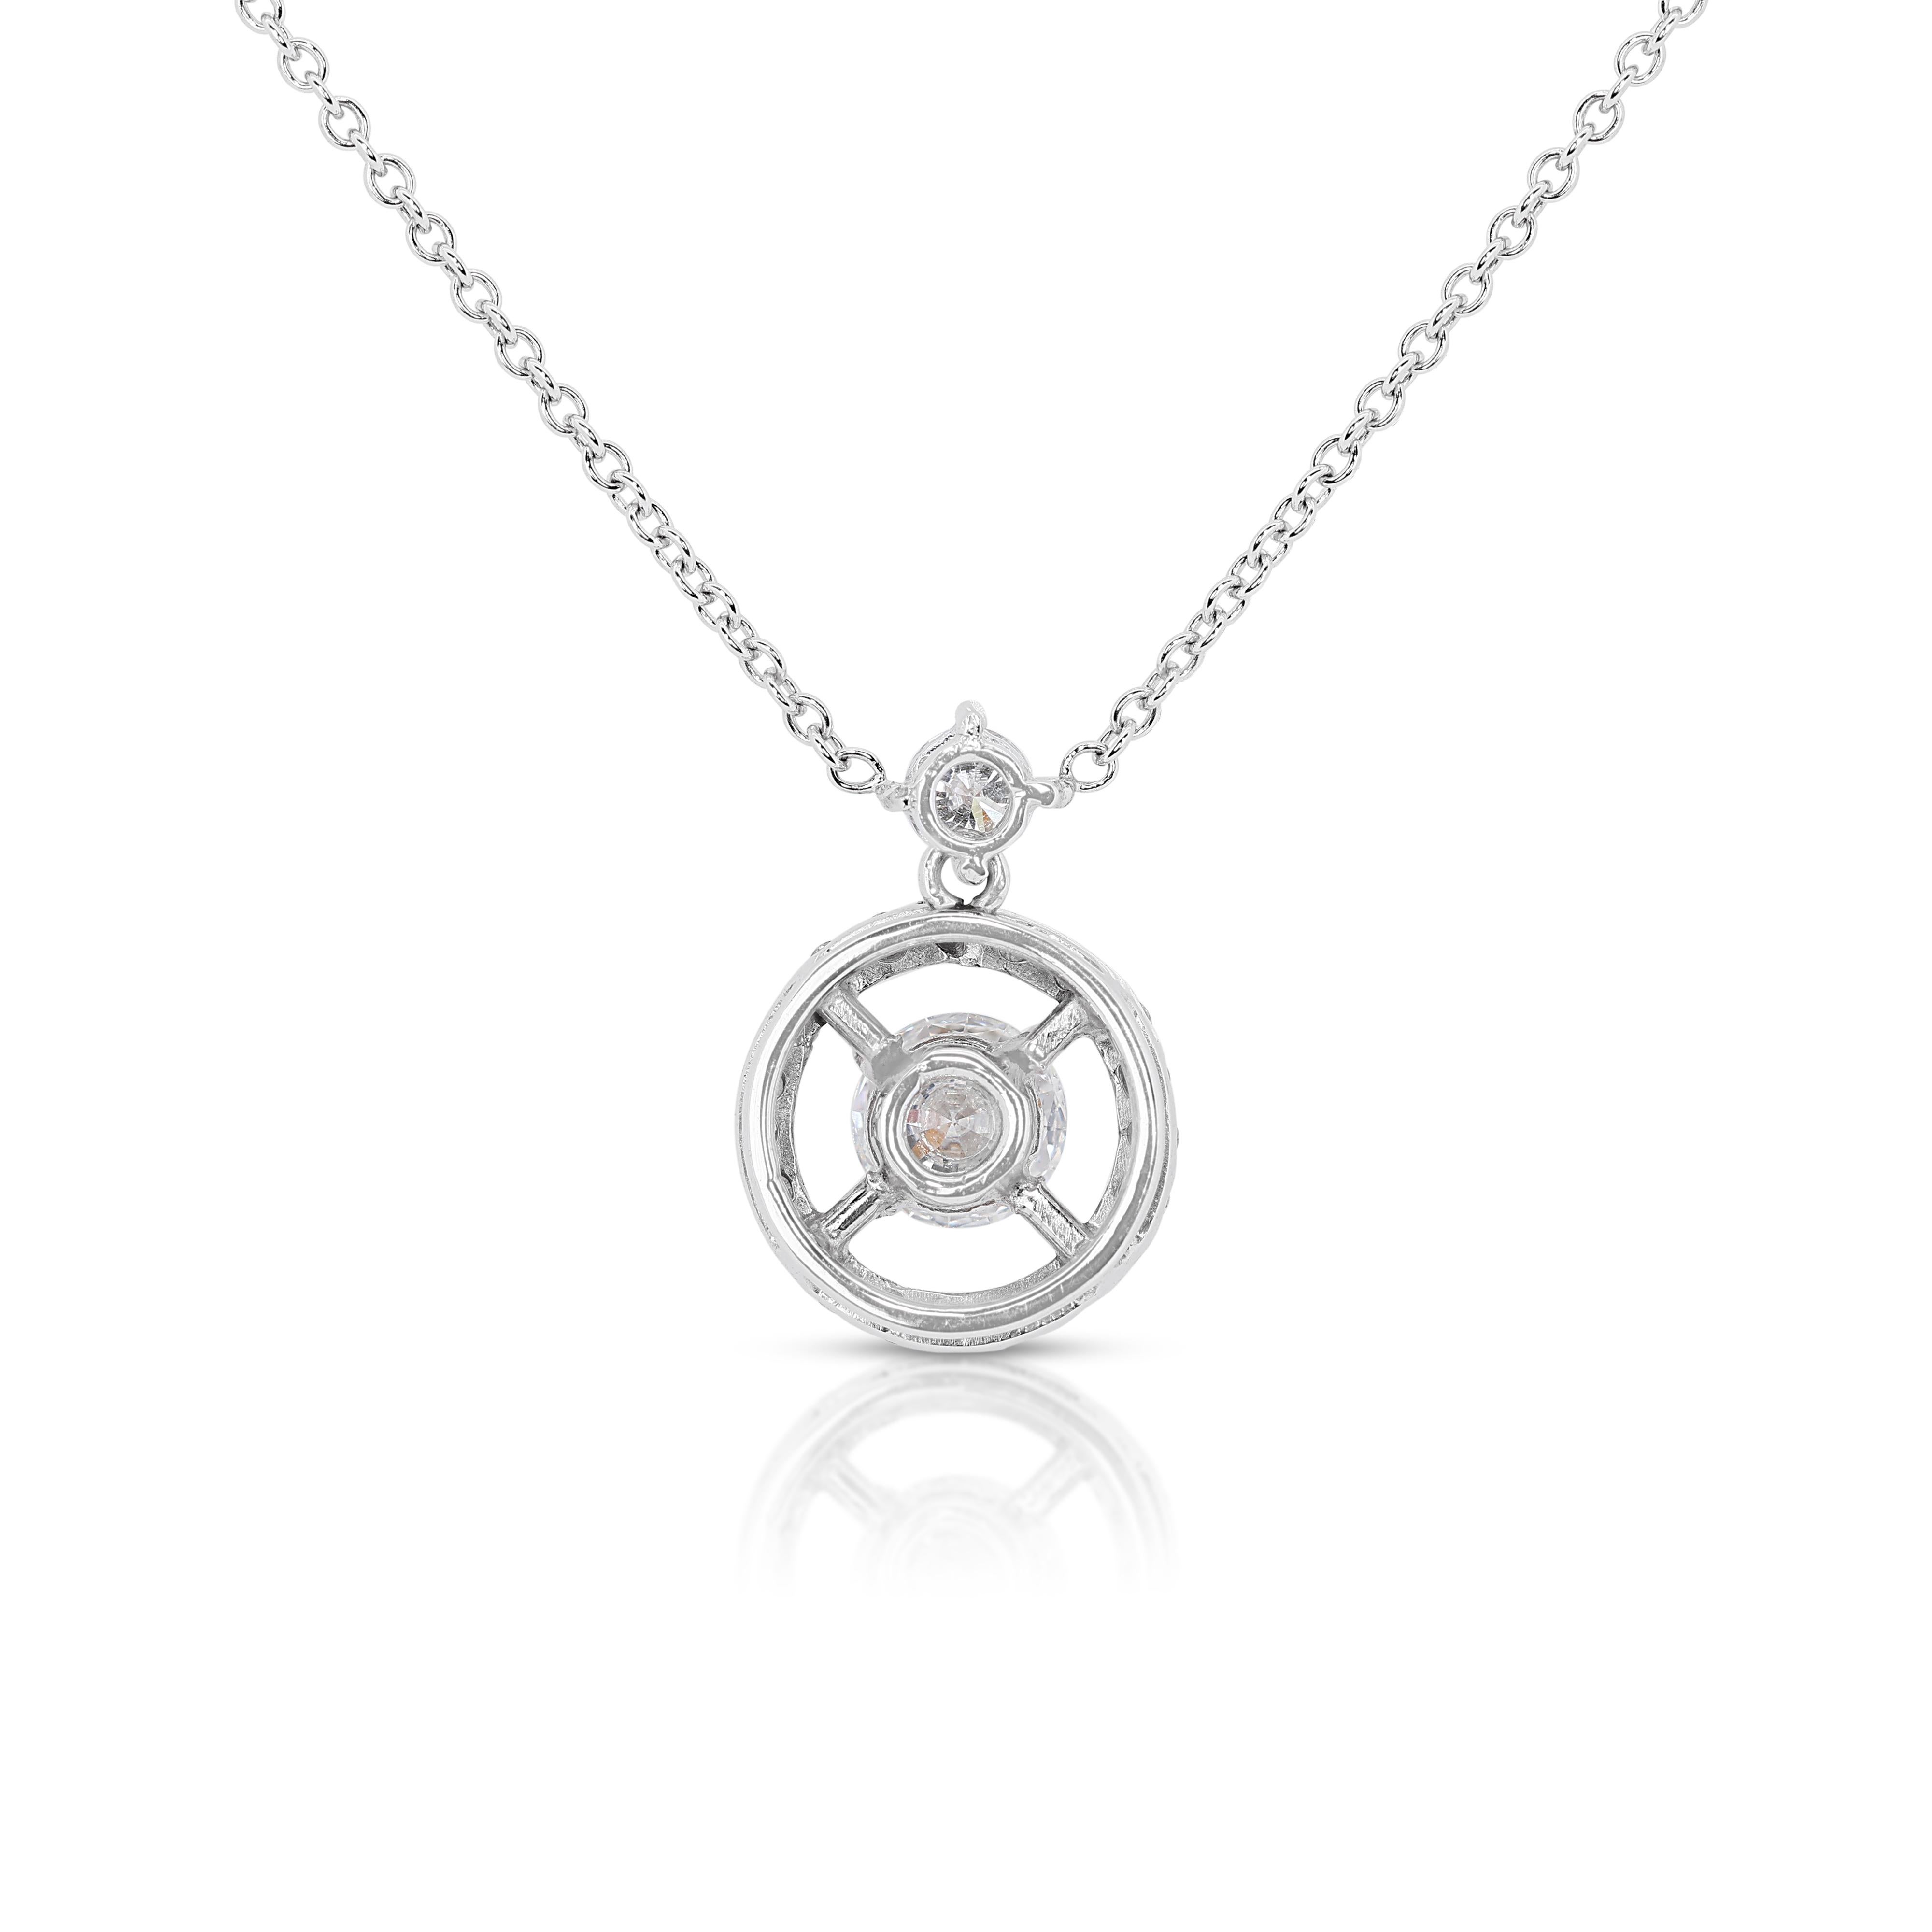 Majestic 0.96ct Diamonds Necklace w/ Pendant in 18K White Gold (Chain Included)  For Sale 1